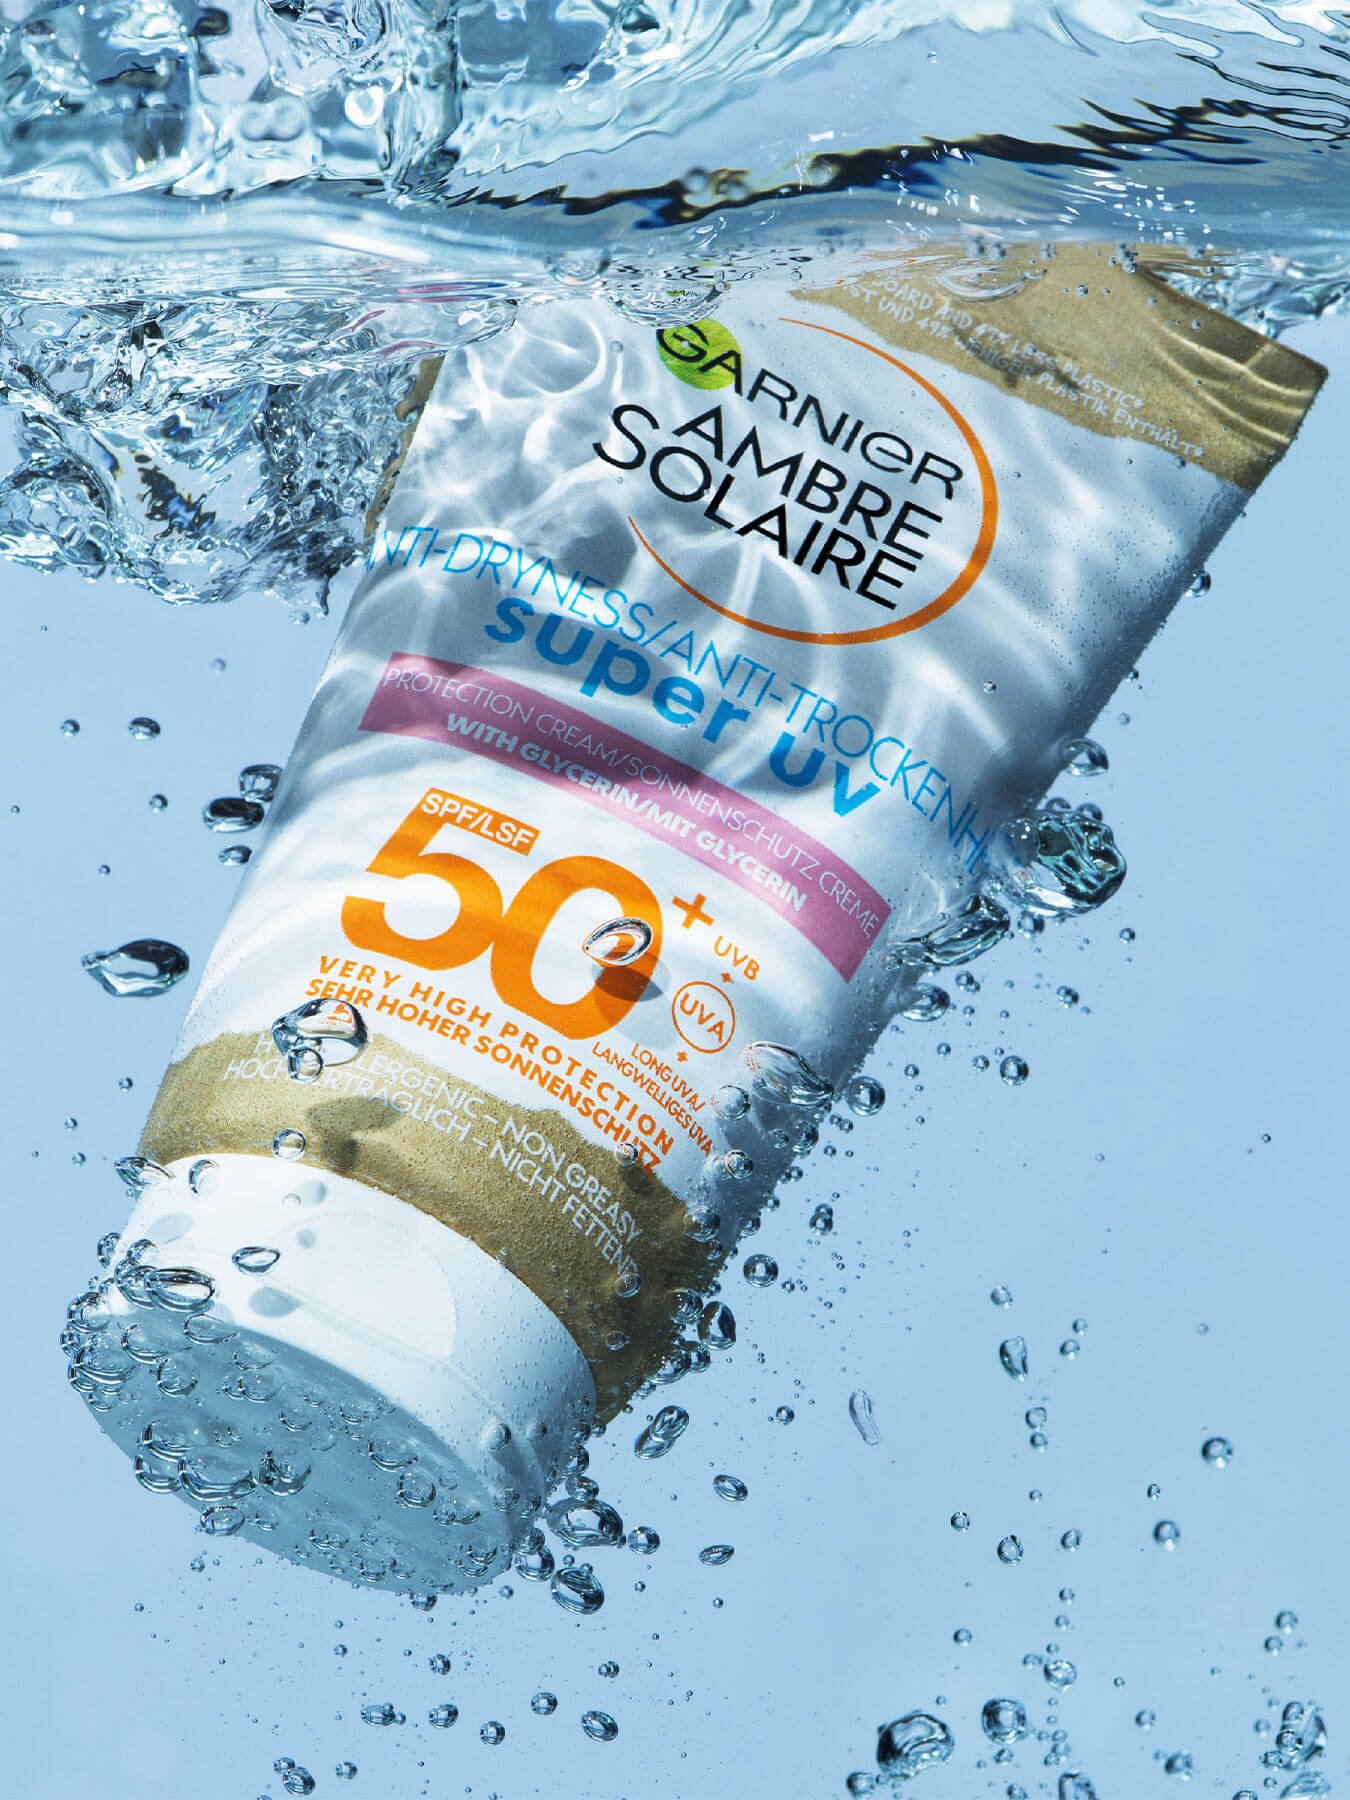 Super UV Ambre Solaire Anti Dryness product in water